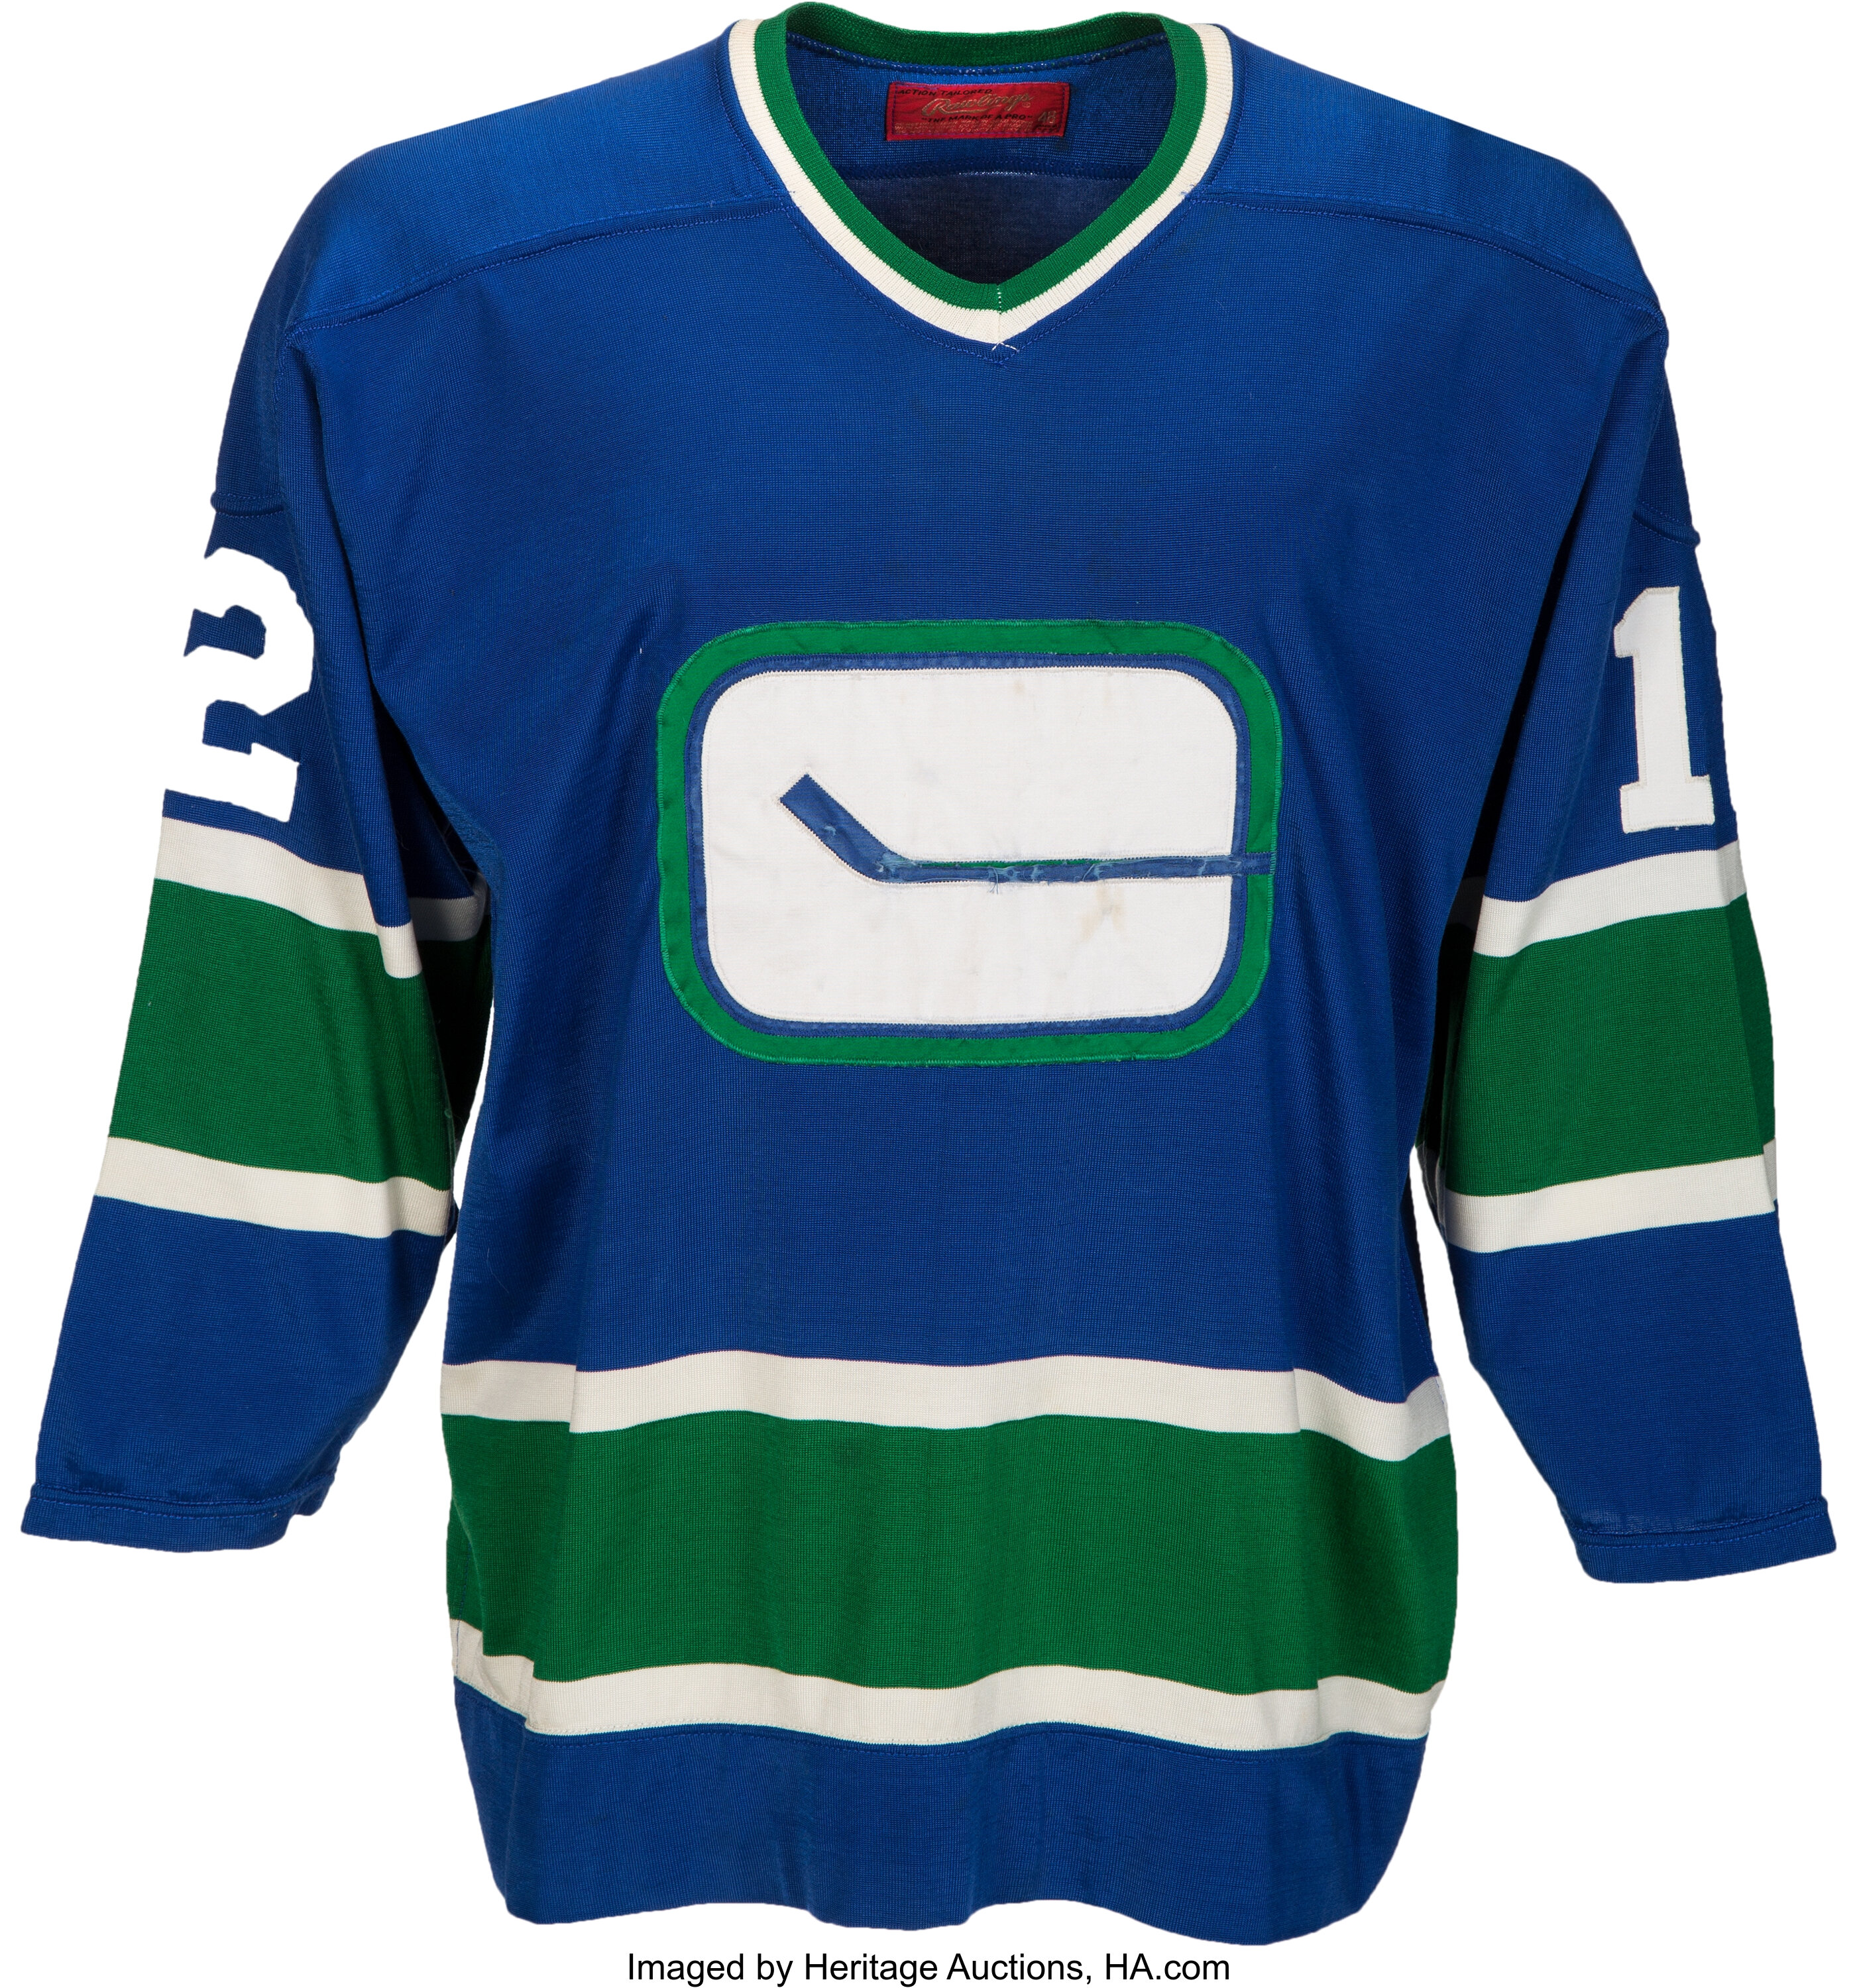 Loving the practice jerseys the Vancouver Canucks wore to